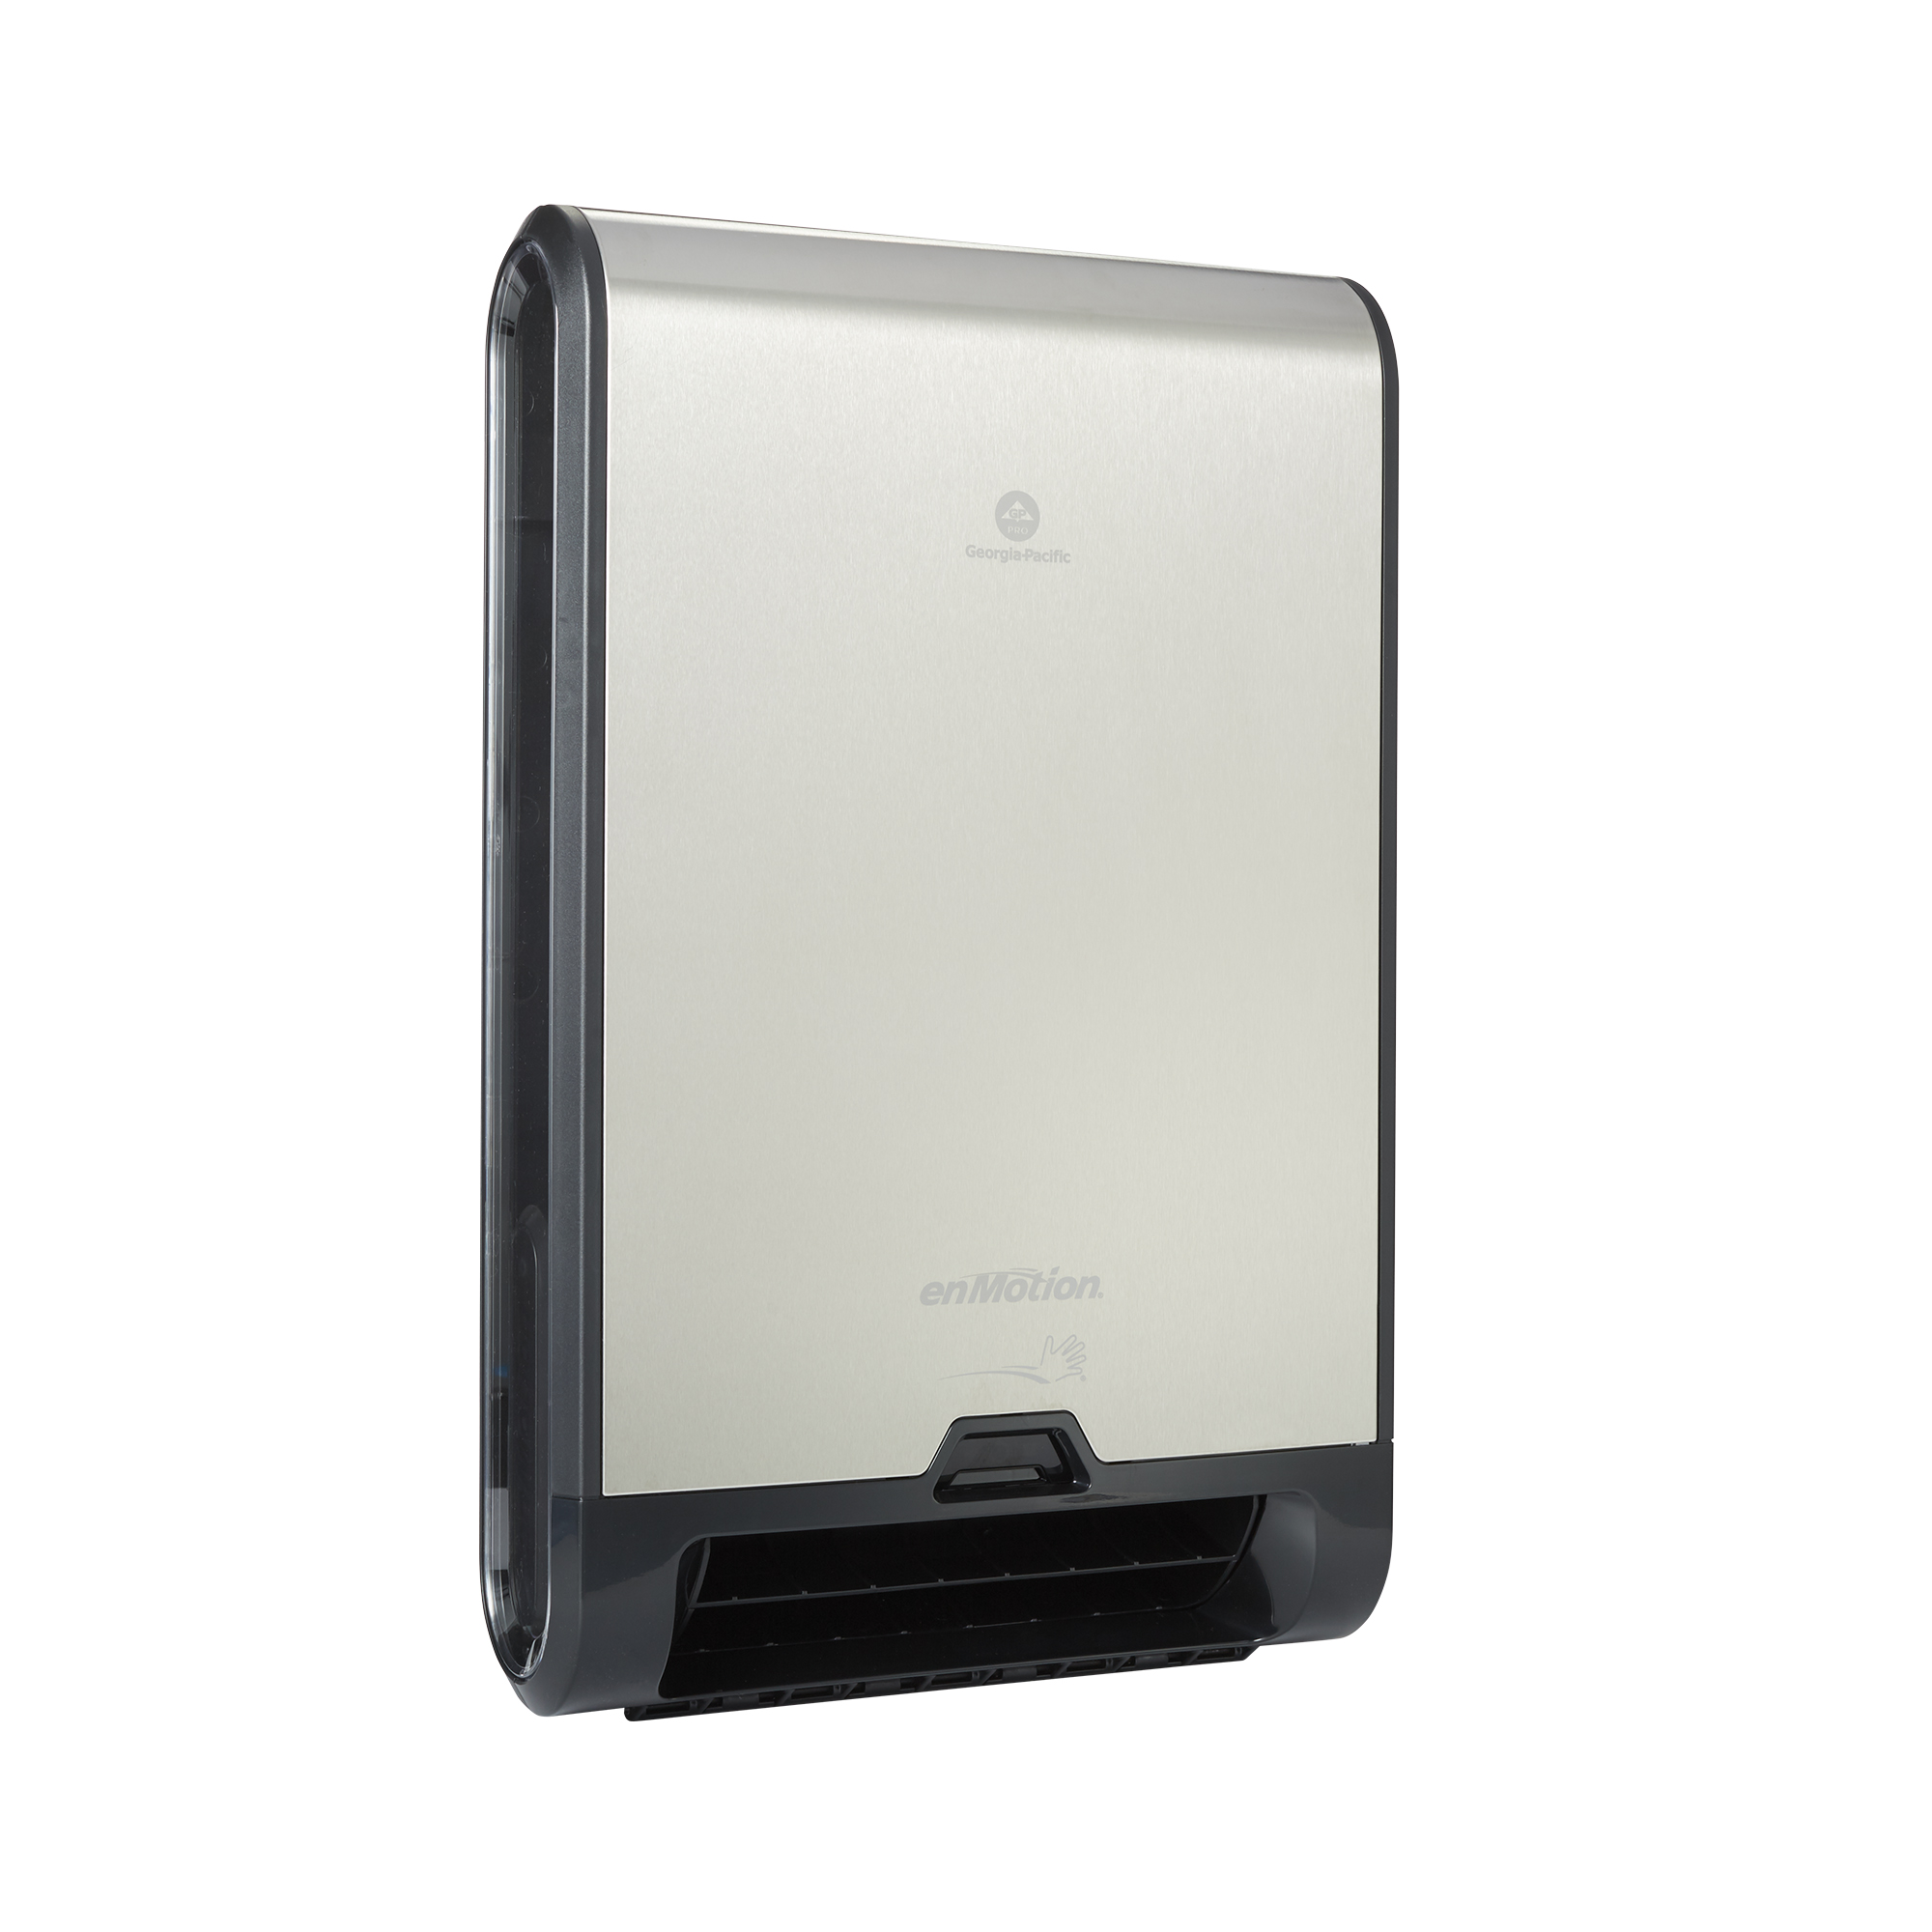 ENMOTION® FLEX RECESSED AUTOMATED TOUCHLESS PAPER TOWEL DISPENSER BY GP PRO (GEORGIA-PACIFIC), STAINLESS STEEL, 1 DISPENSER